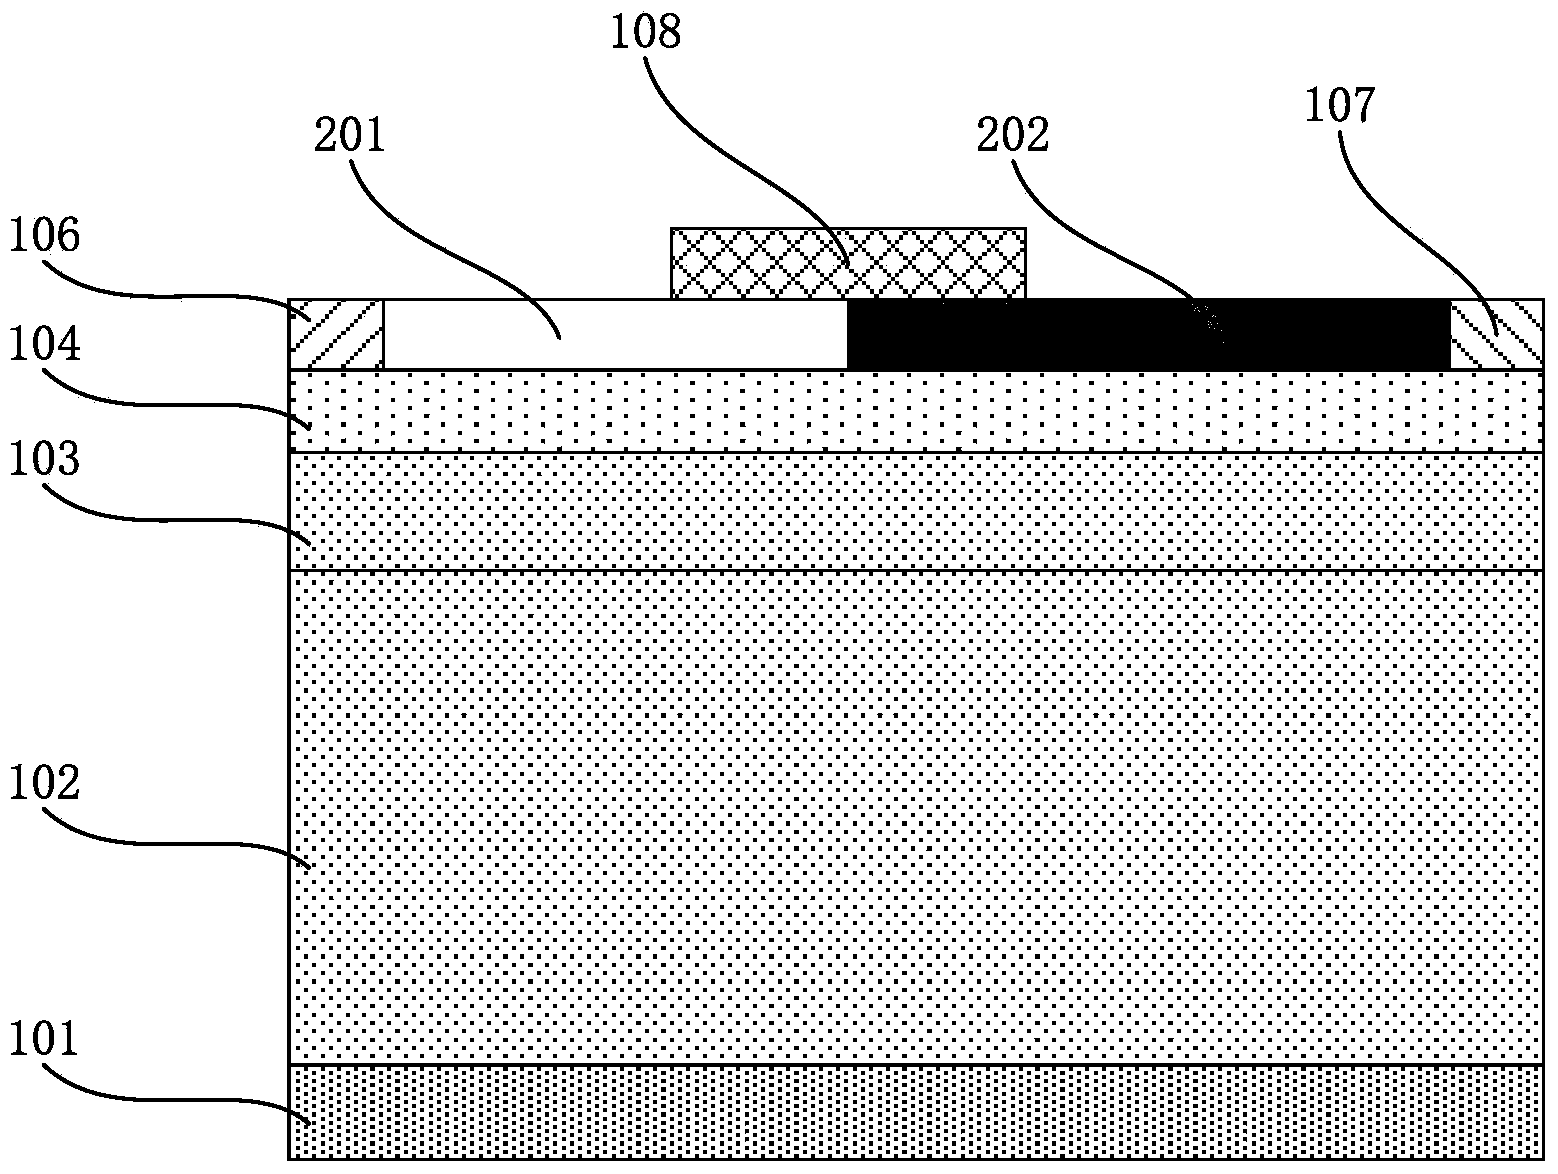 Gallium-nitride-based heterojunction field effect transistor with combined gate dielectric layer